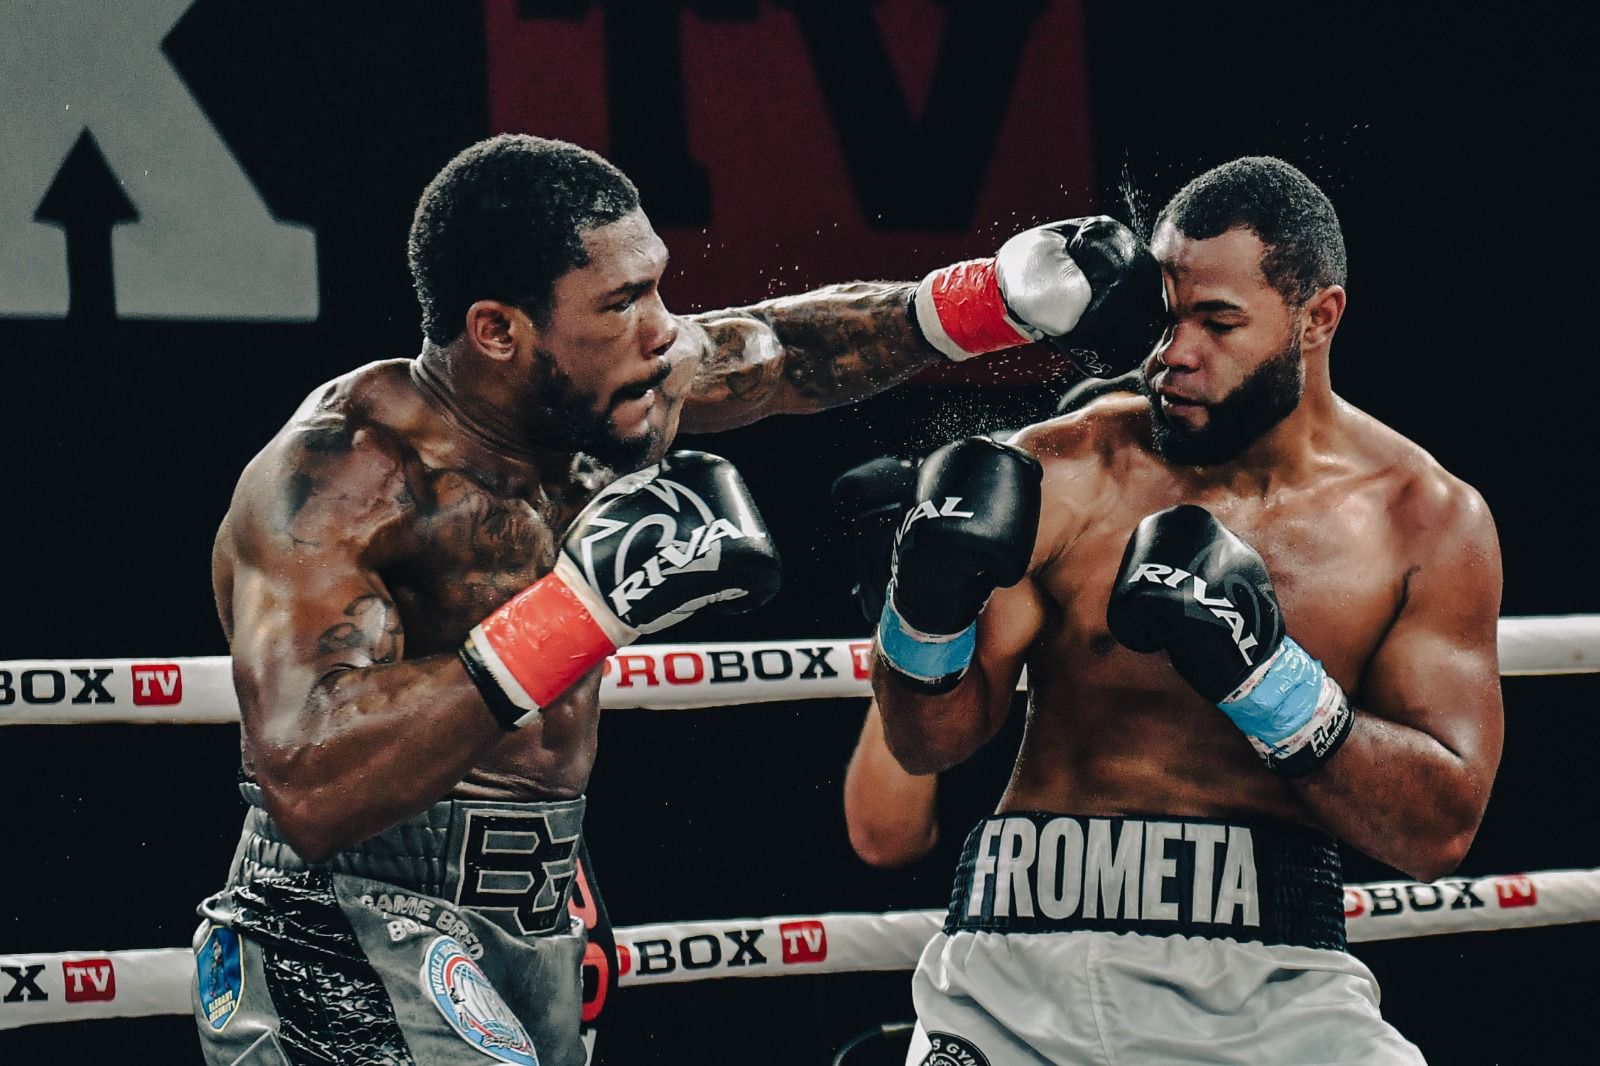 Brandon Glanton returns to victory with stoppage win over Carlos Frometa